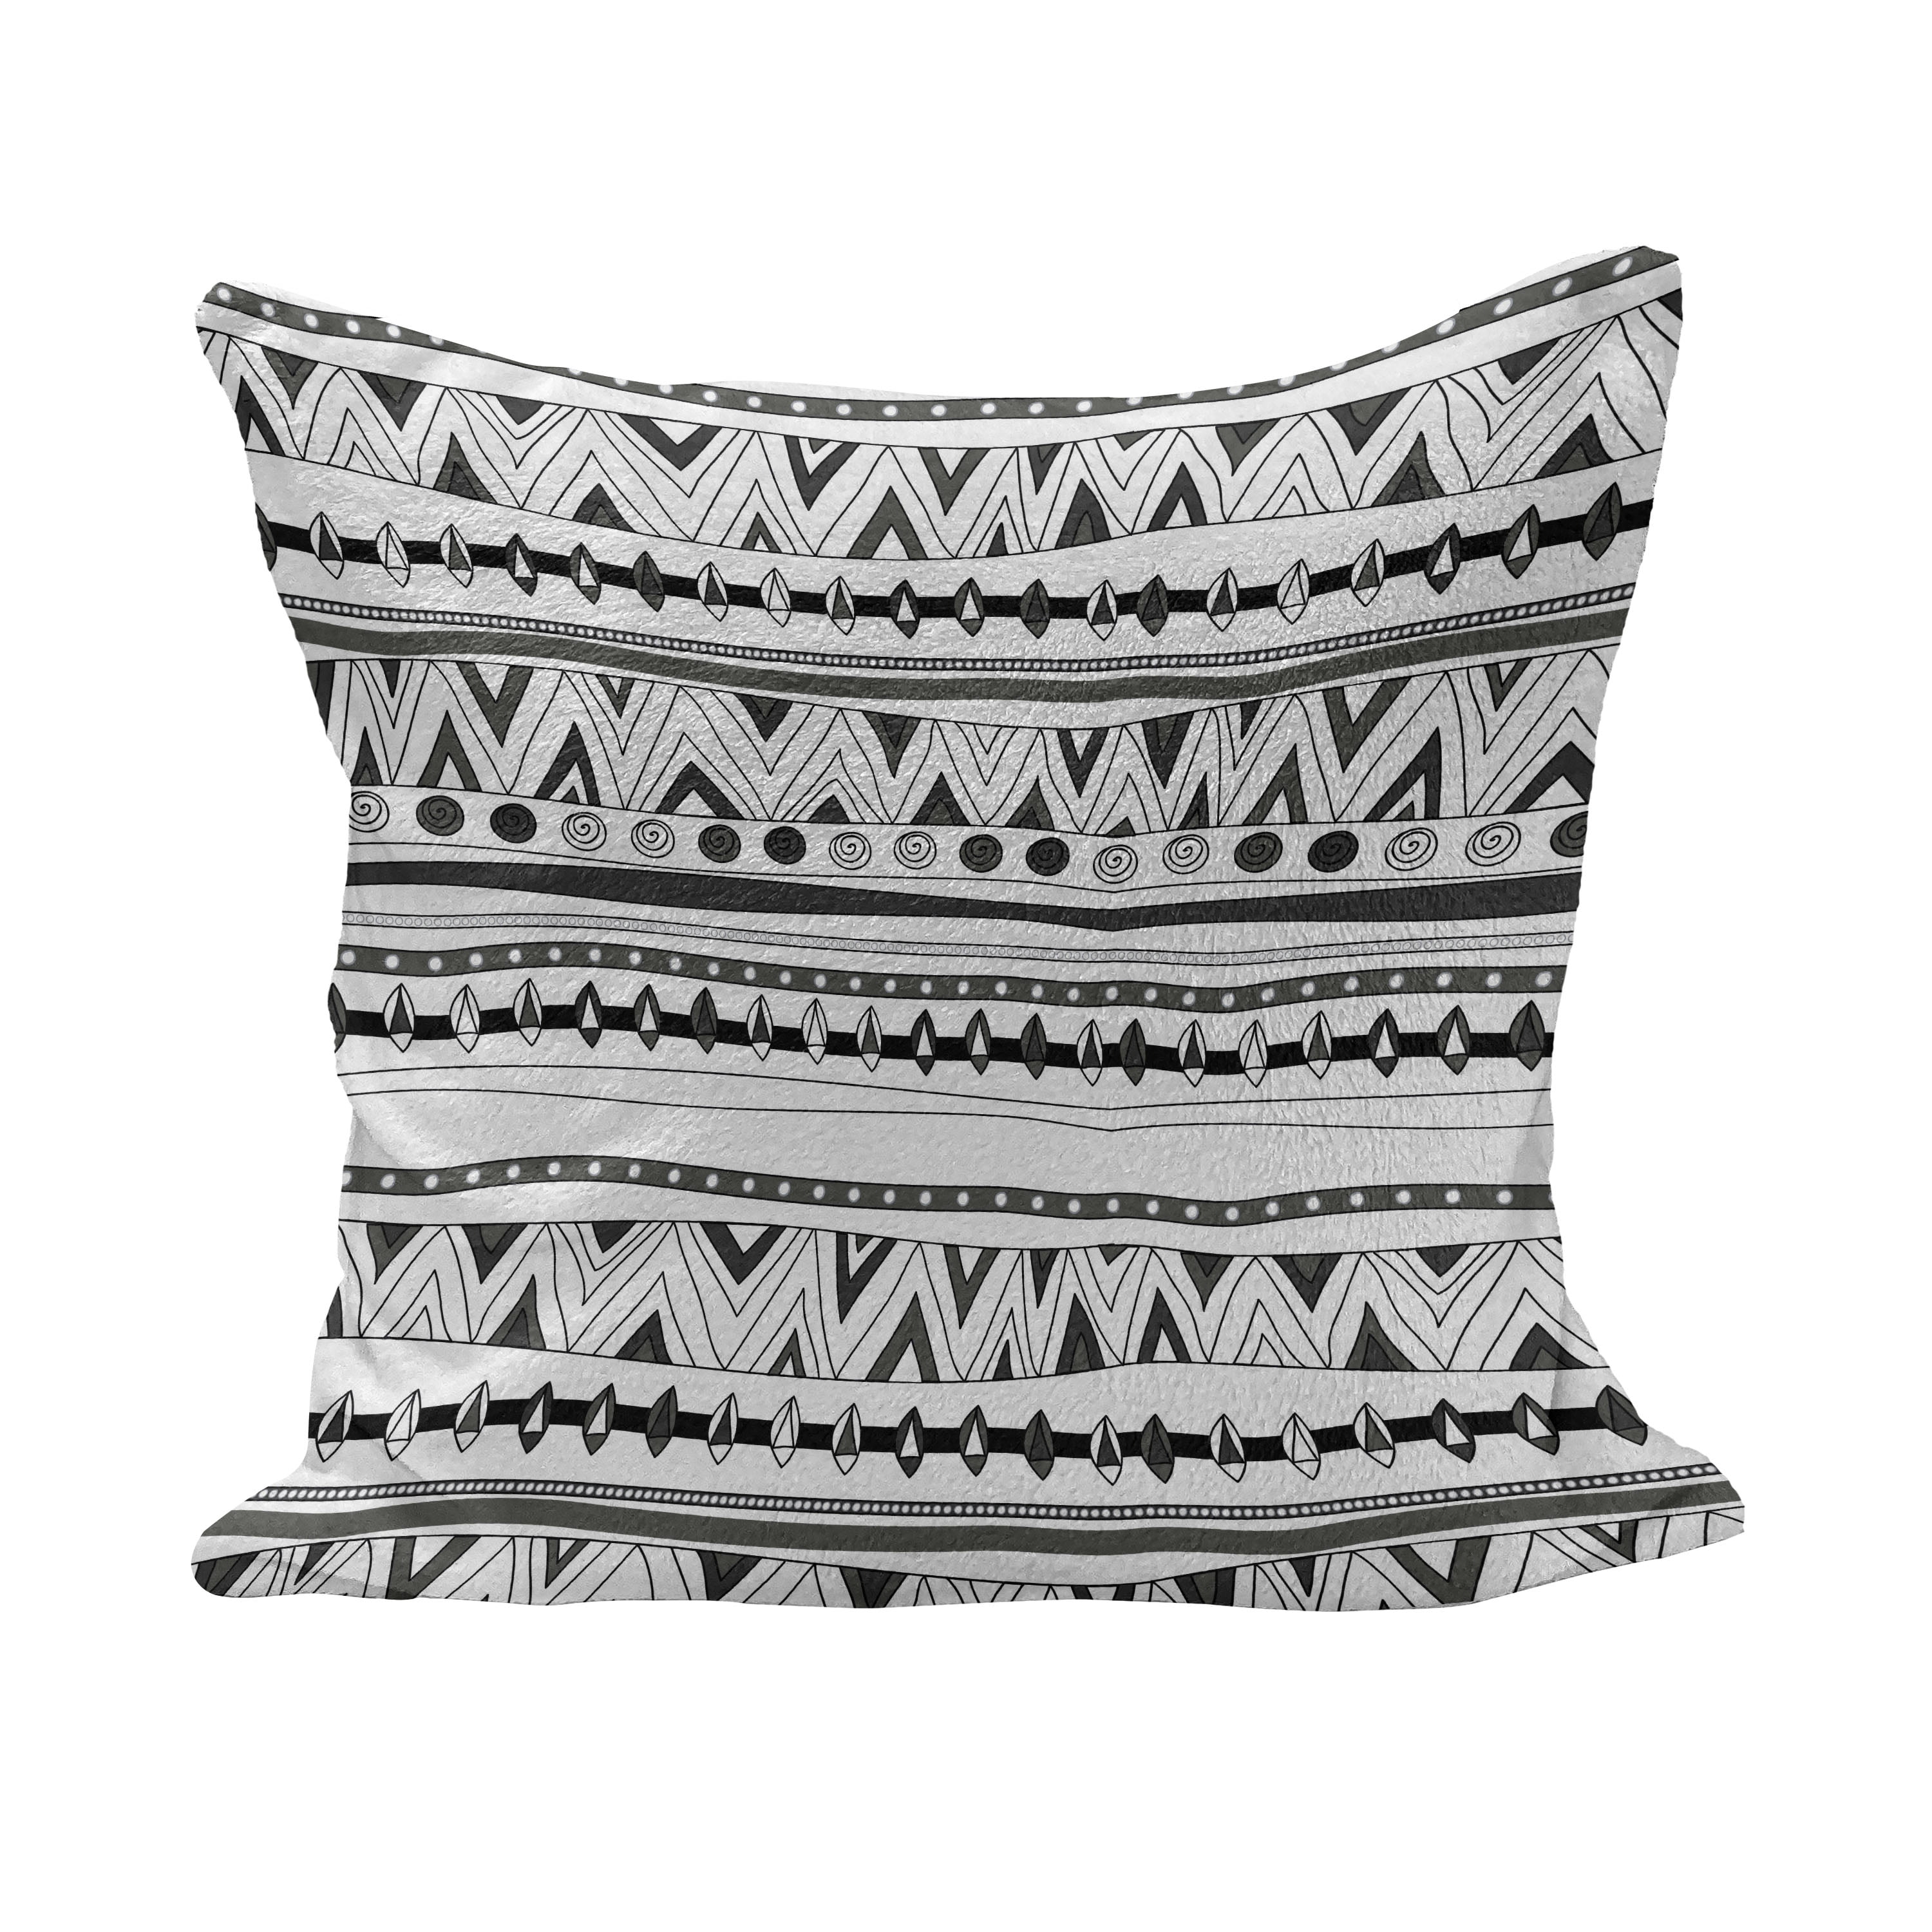 African Throw Pillow Case Sketchy Ethnic Dancer Square Cushion Cover 16 Inches